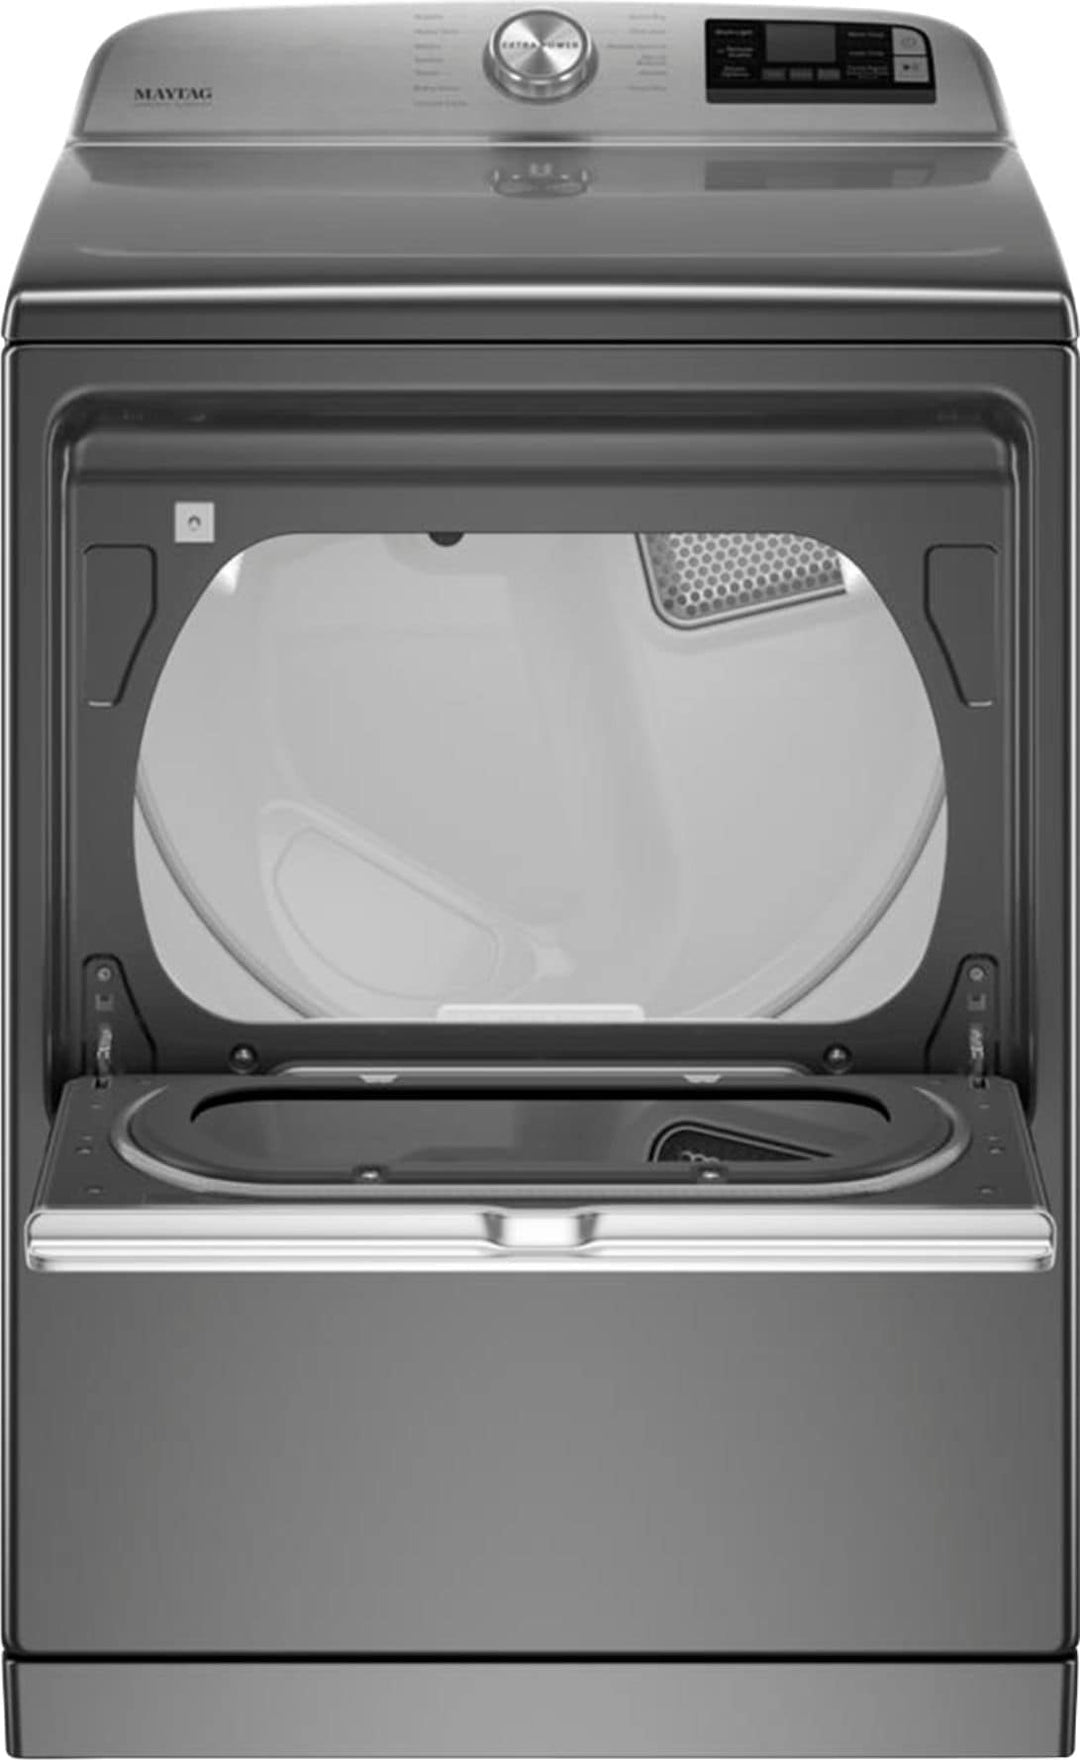 Maytag - 7.4 Cu. Ft. Smart Electric Dryer with Steam and Extra Power Button - Metallic slate_8